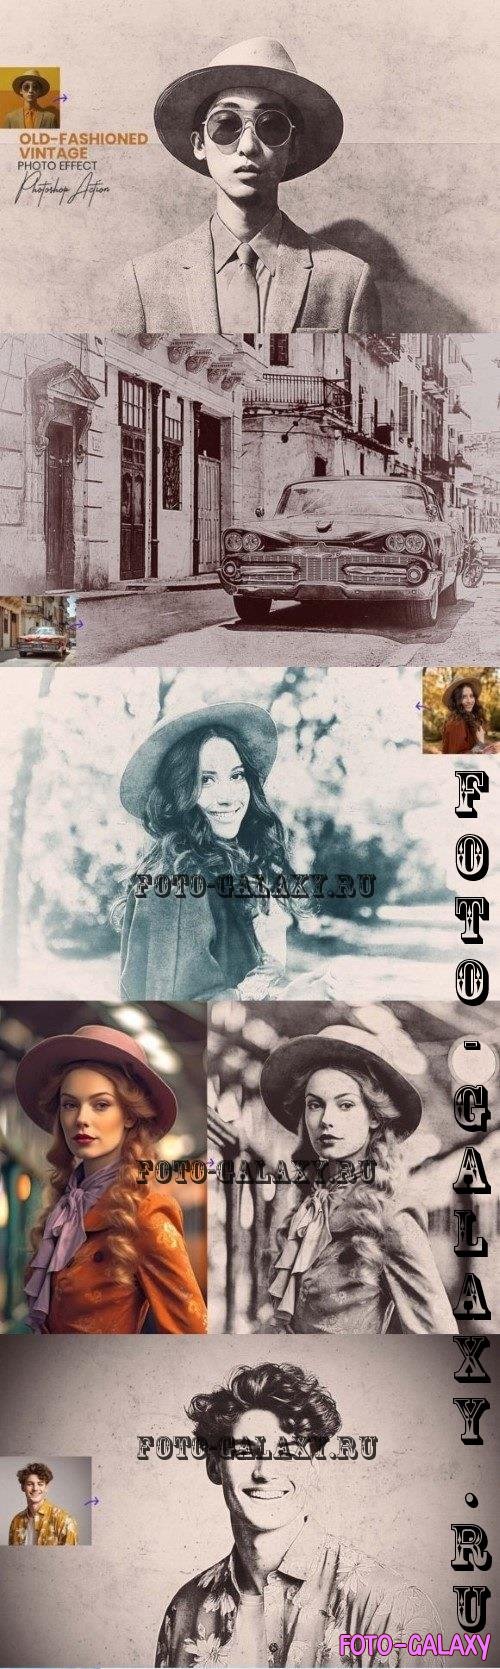 Old-fashioned Vintage Photo Effect - 42245349